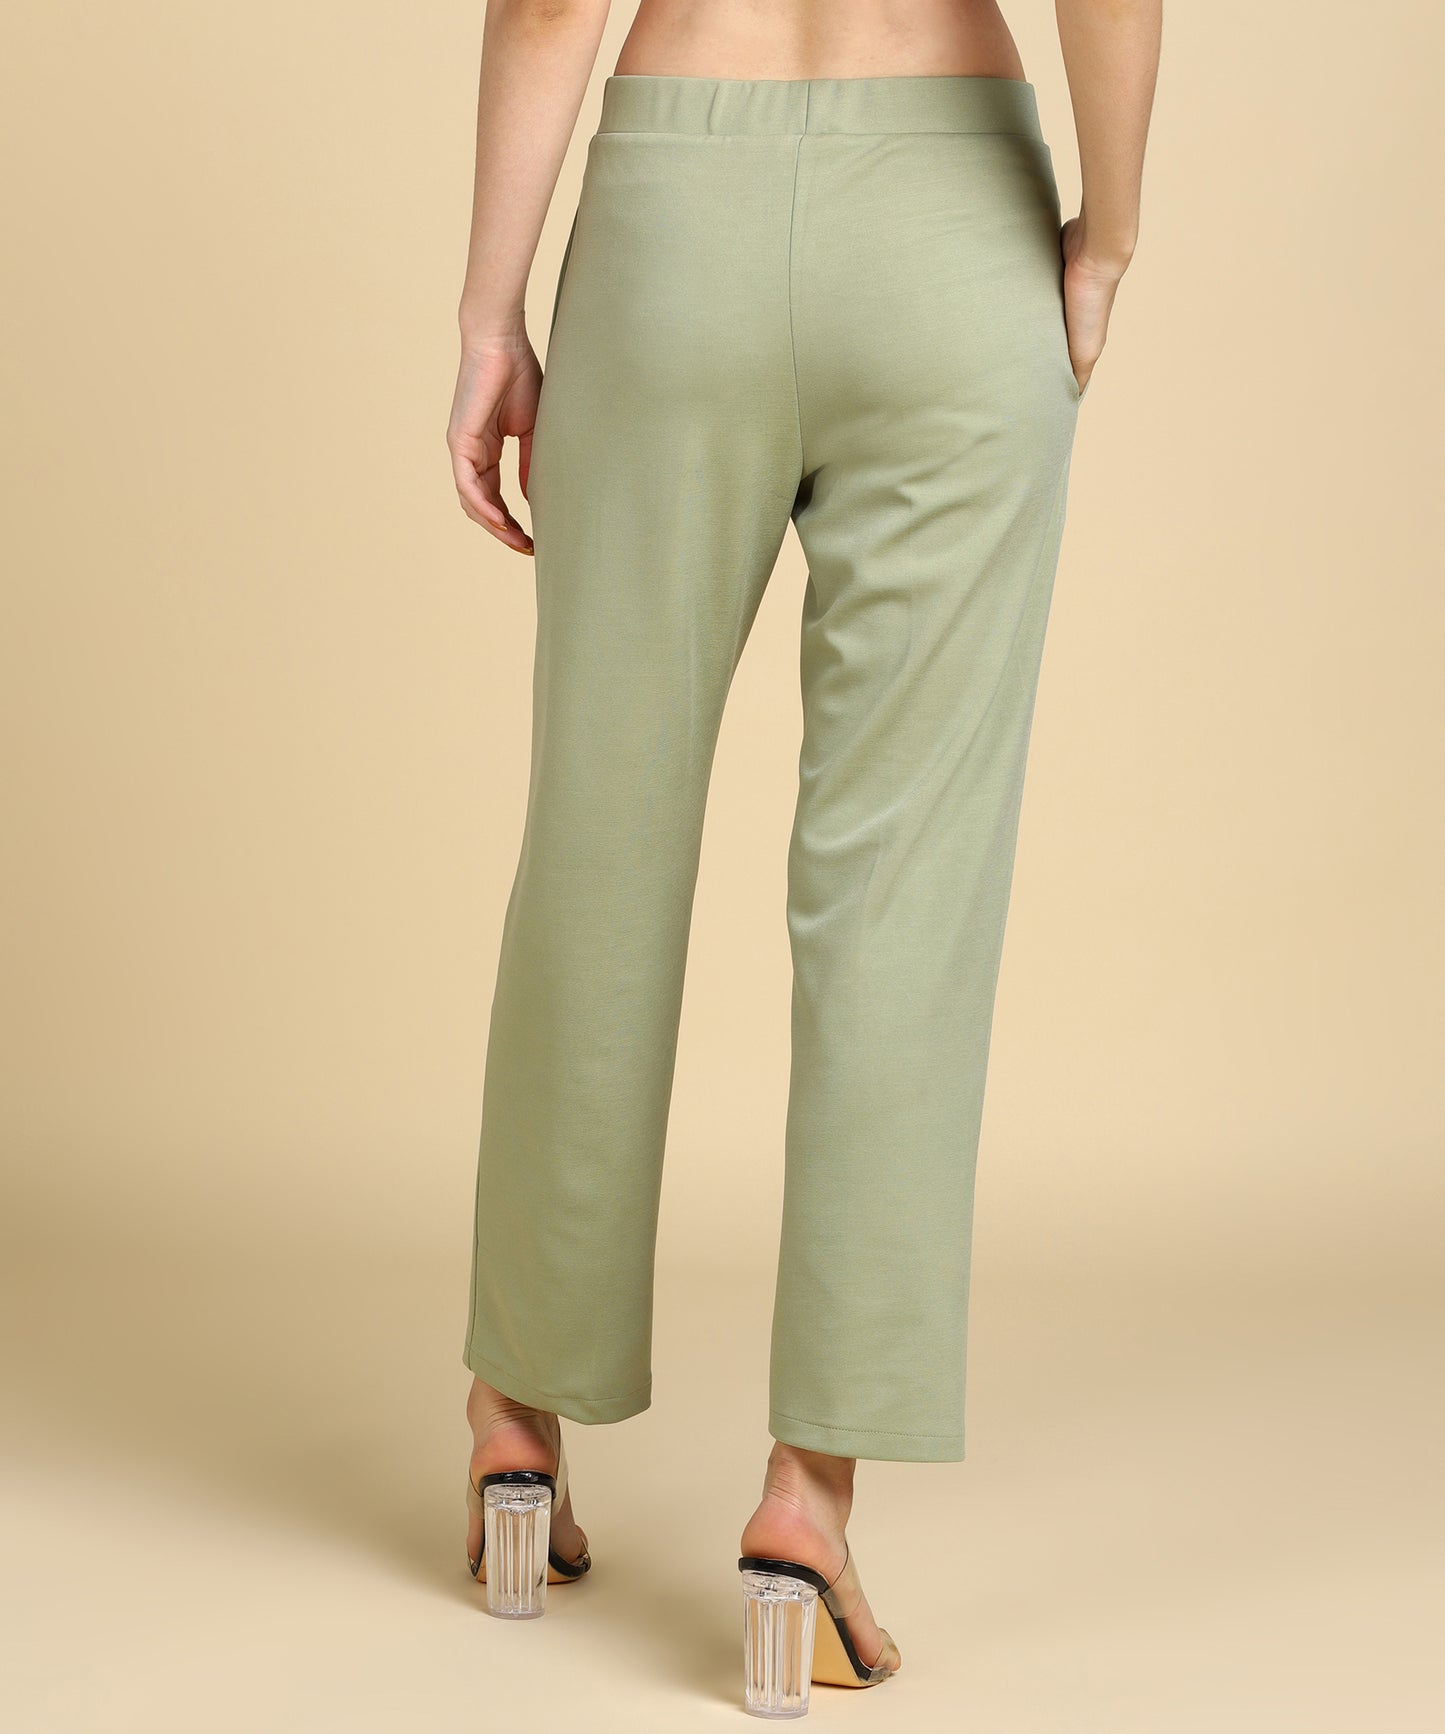 Women's High Waist Formal Stretchable Relaxed Parallel Trouser Pants - 694